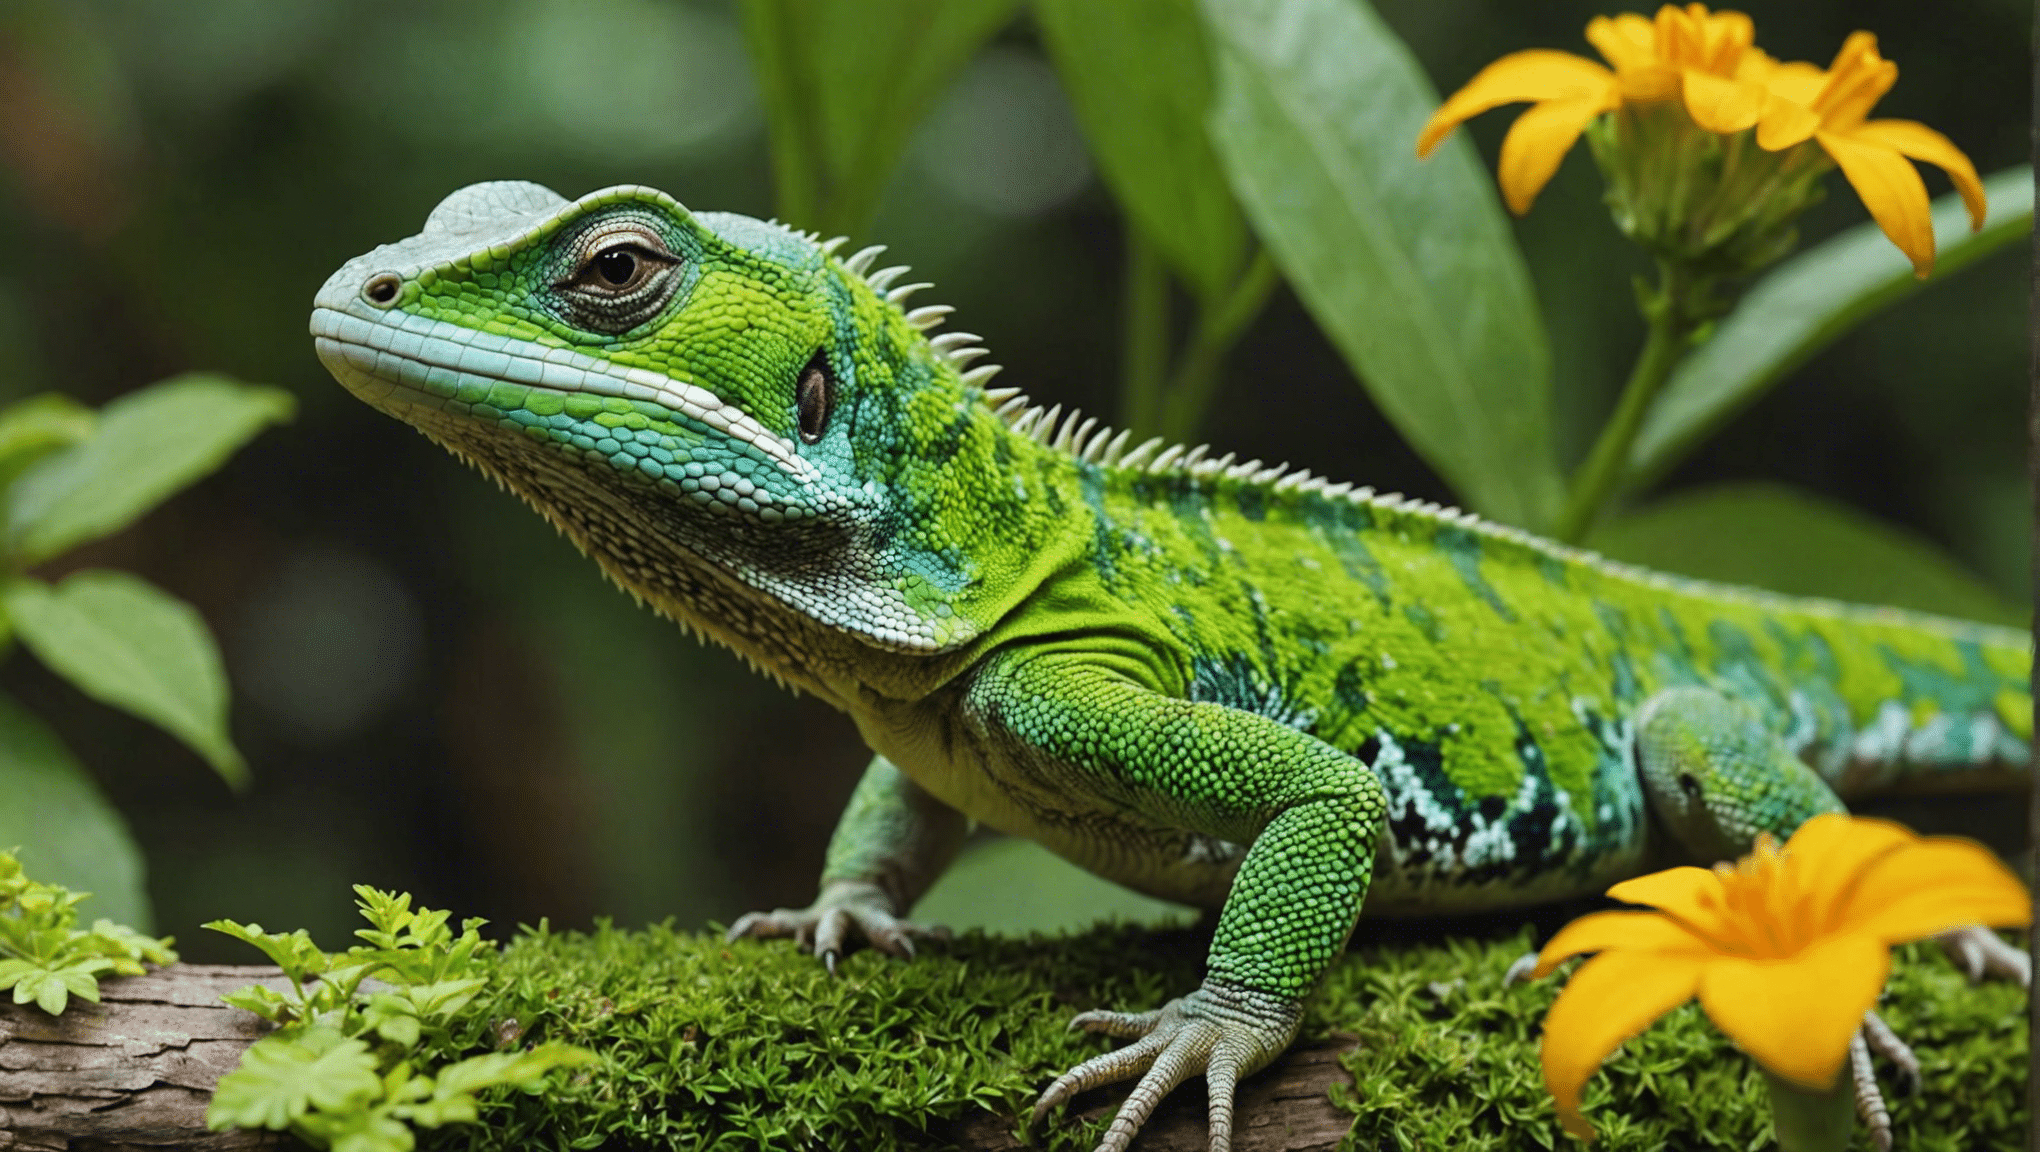 discover what lizards eat and interesting facts about their diet. find out what's on the menu for lizards in the wild and as pets.